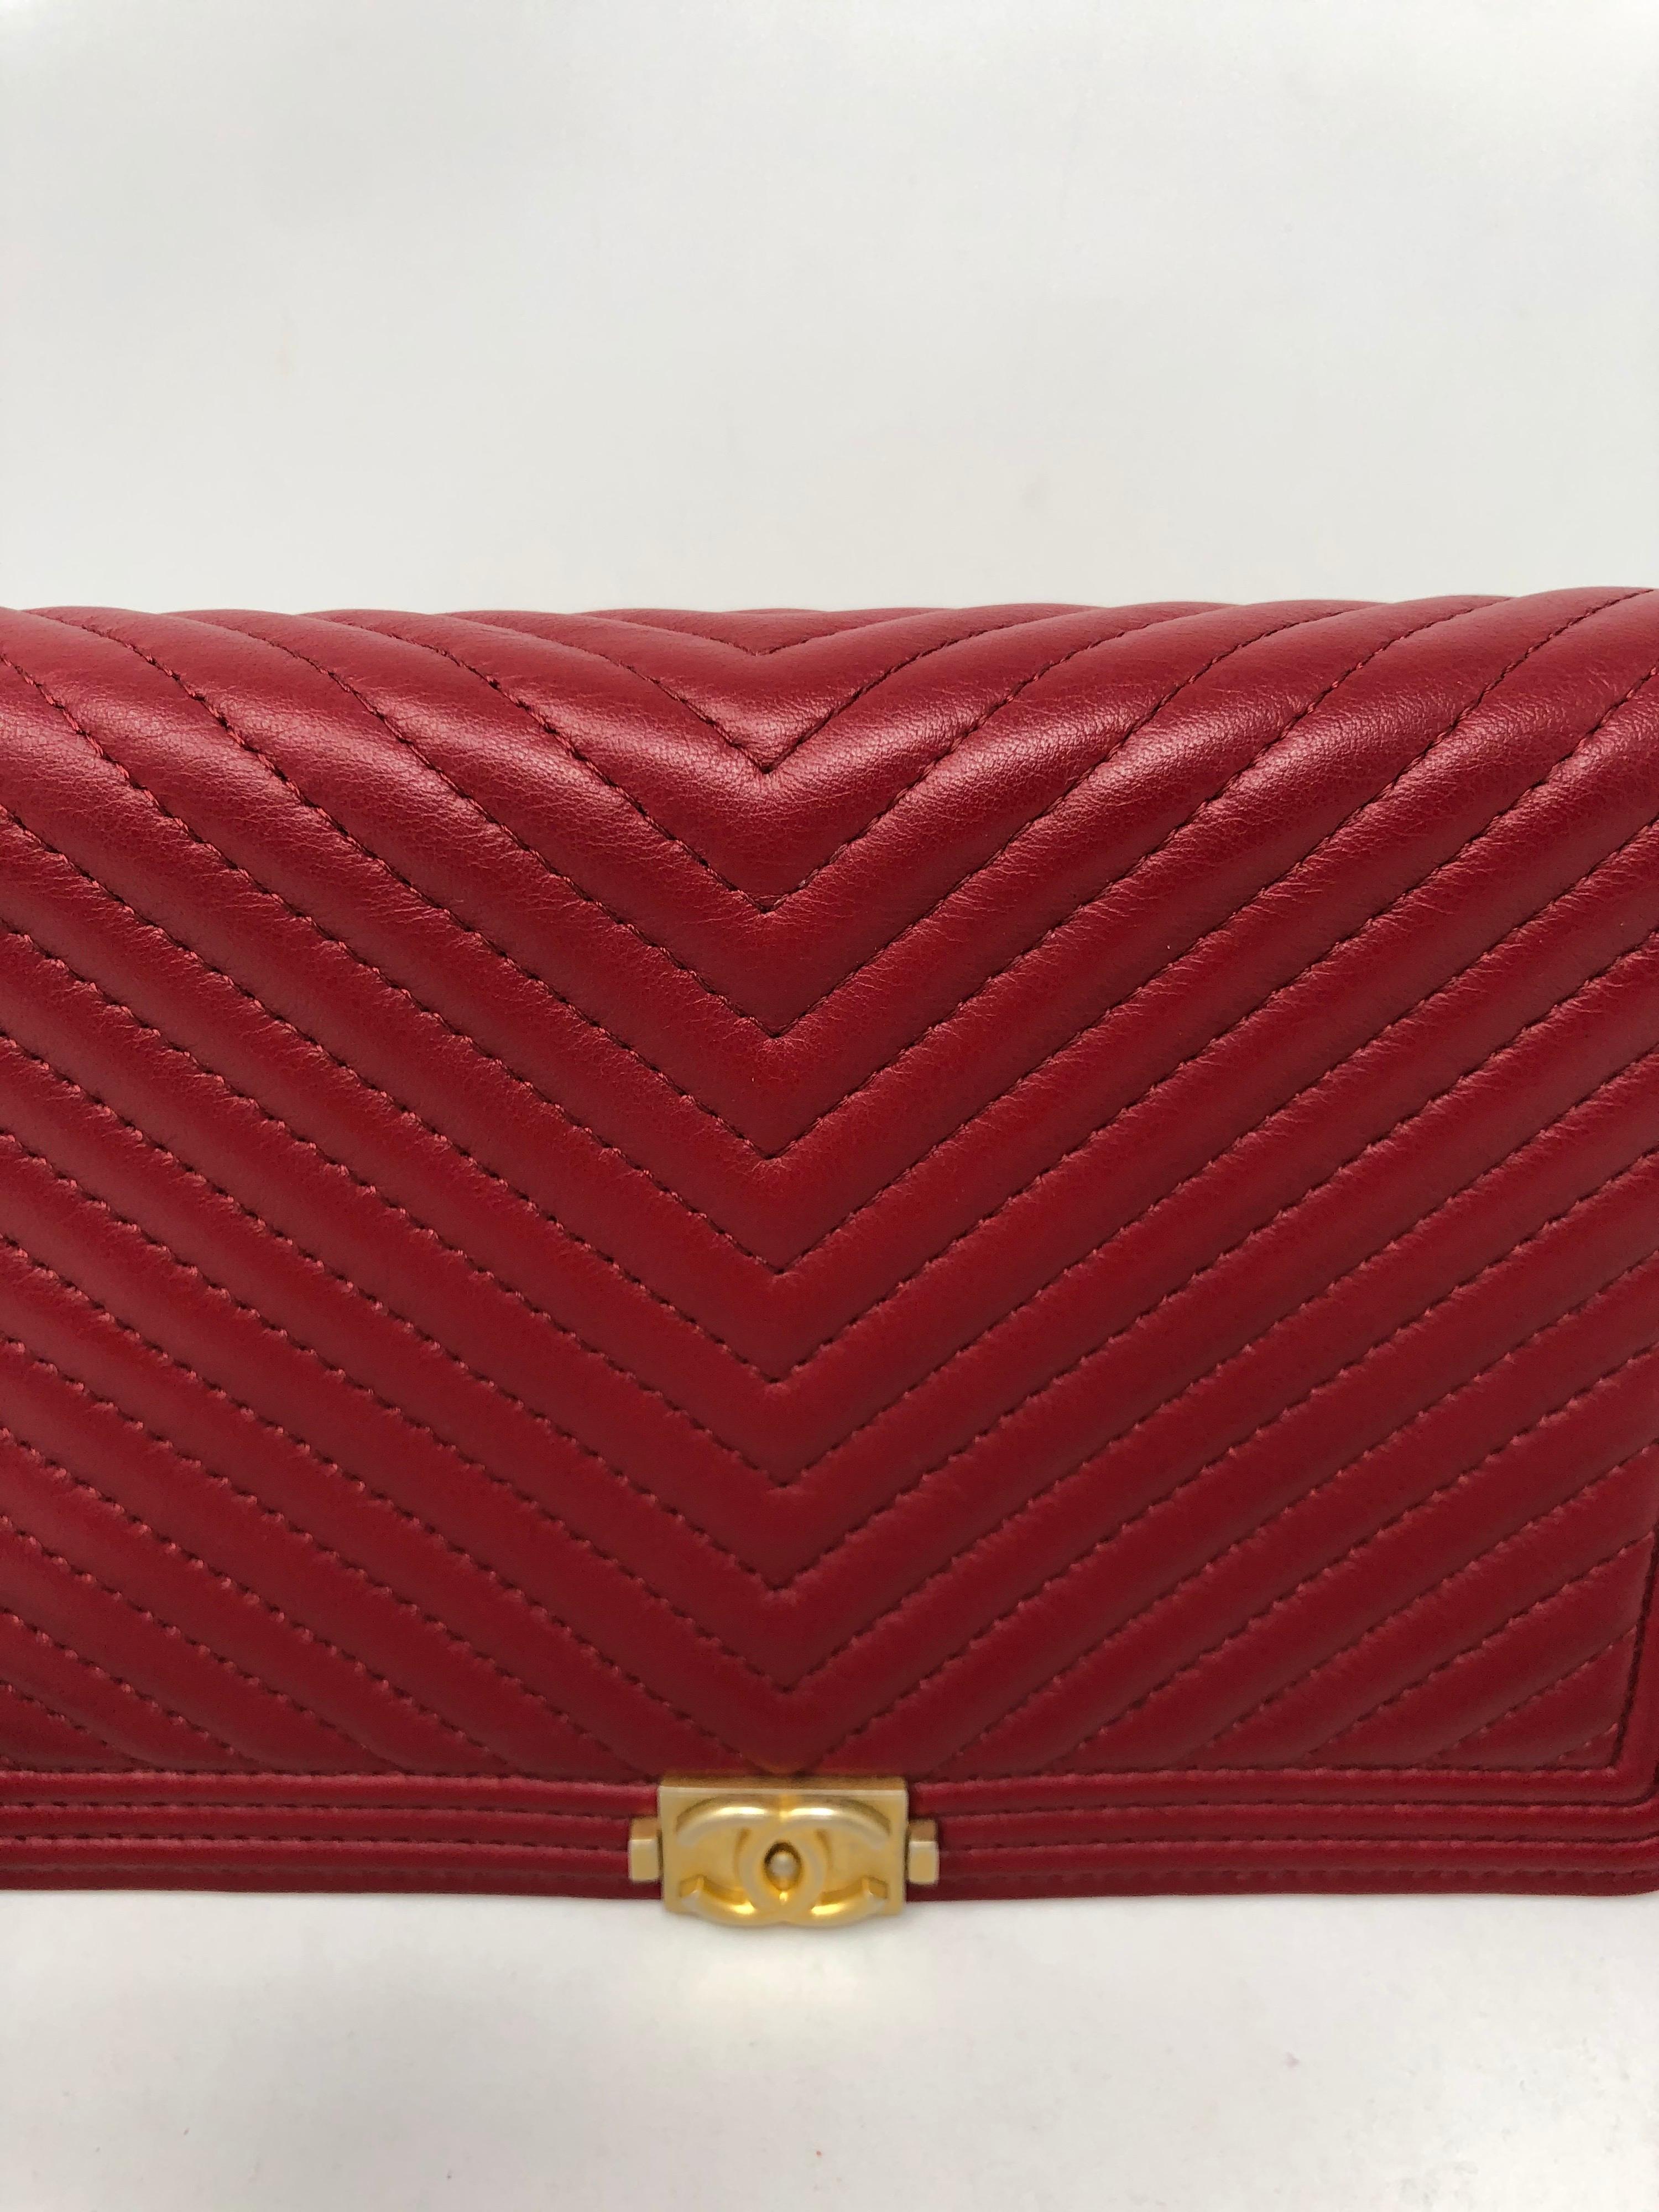 Women's or Men's Chanel Red Boy Wallet On A Chain Bag